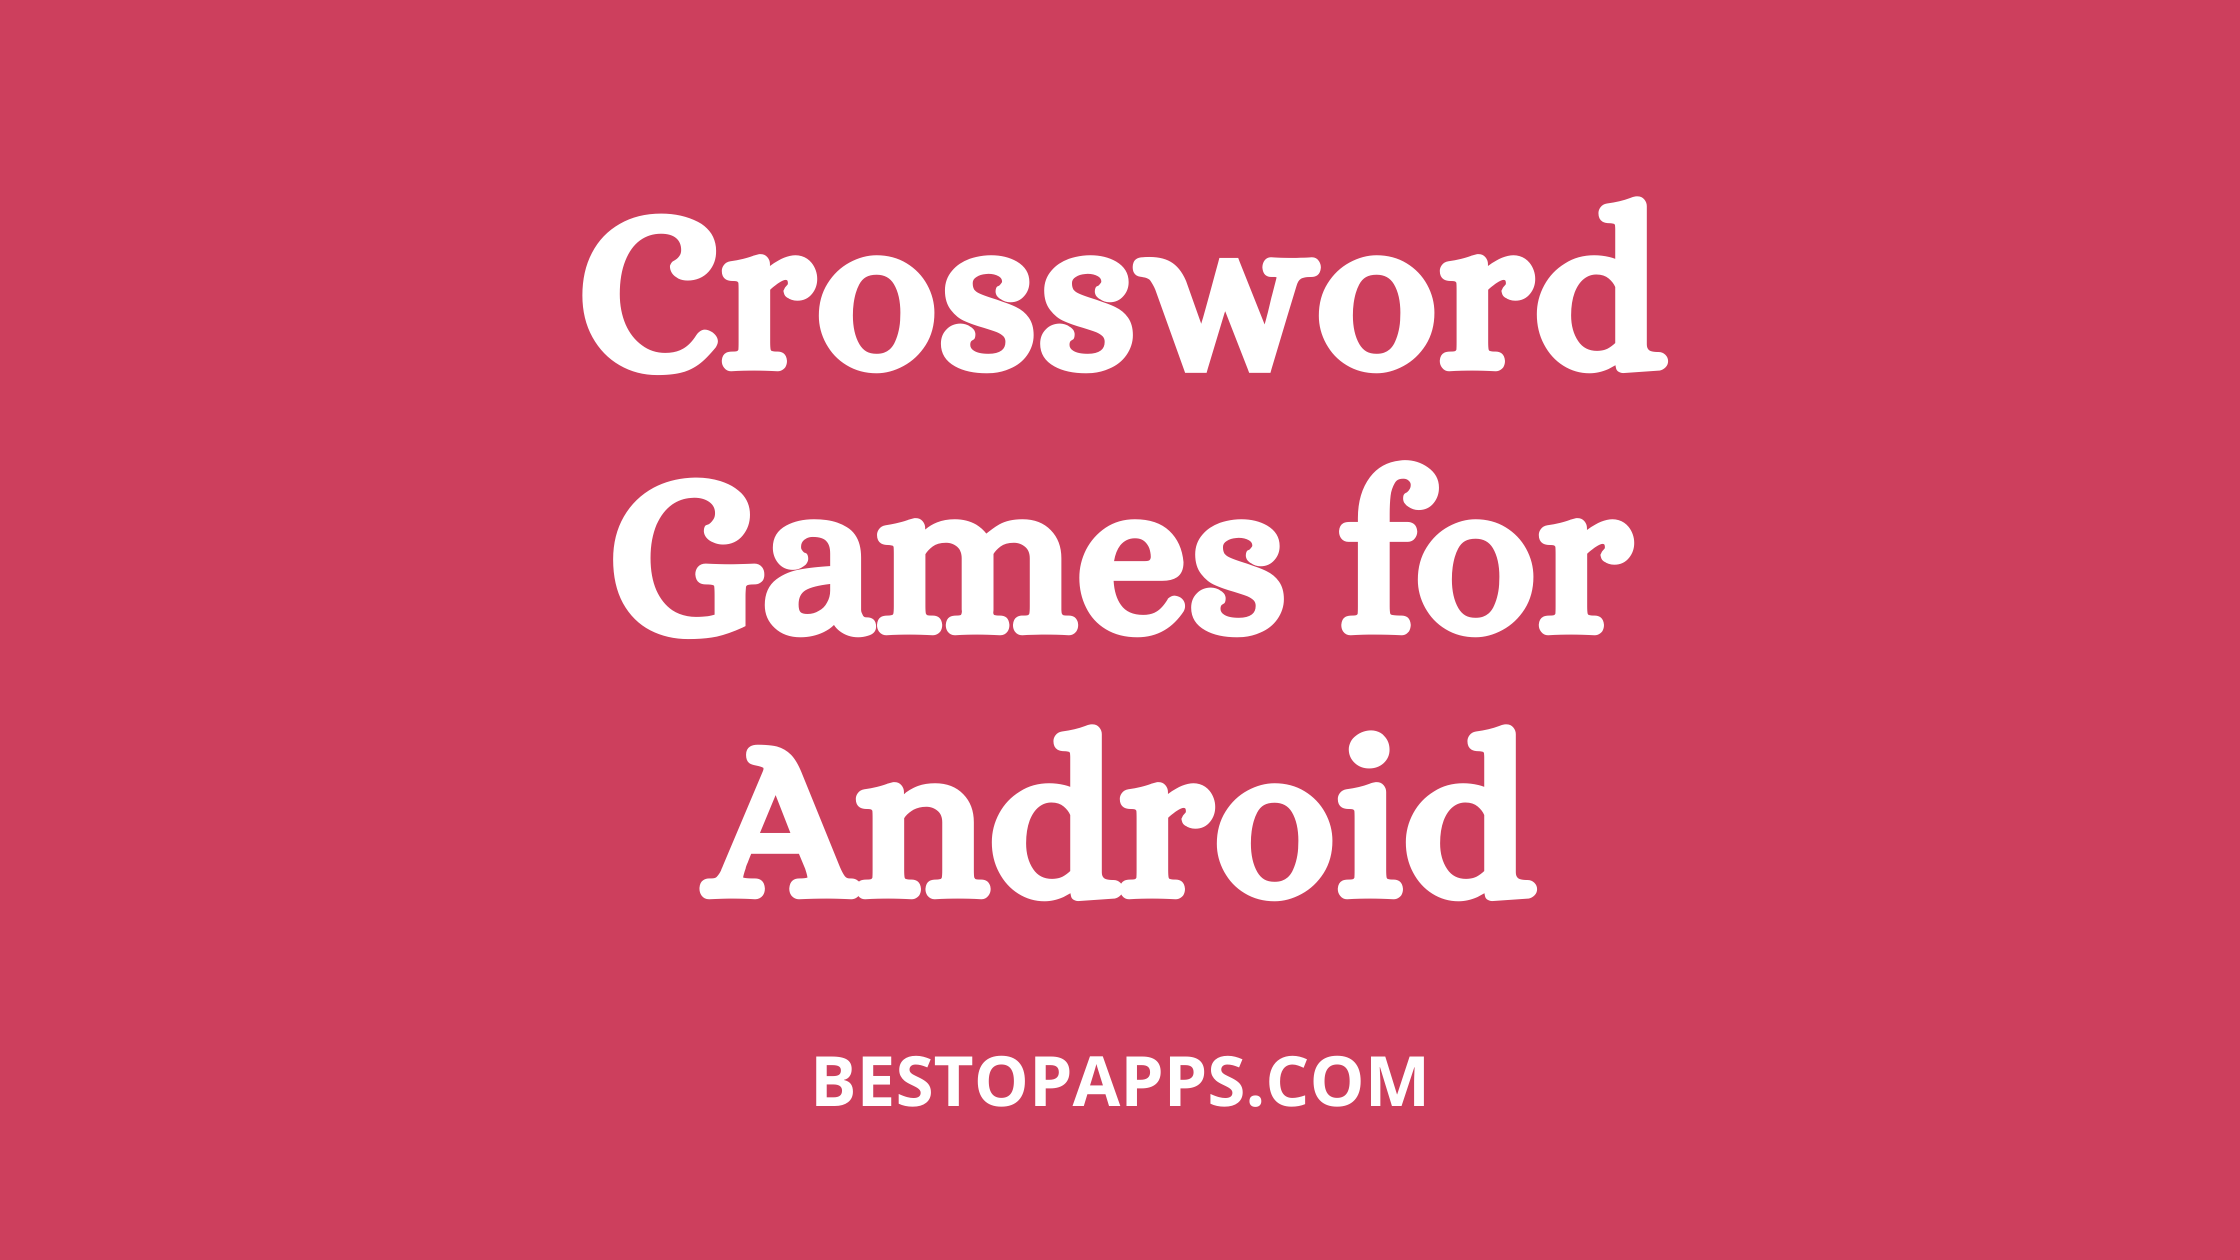 Crossword Games for Android